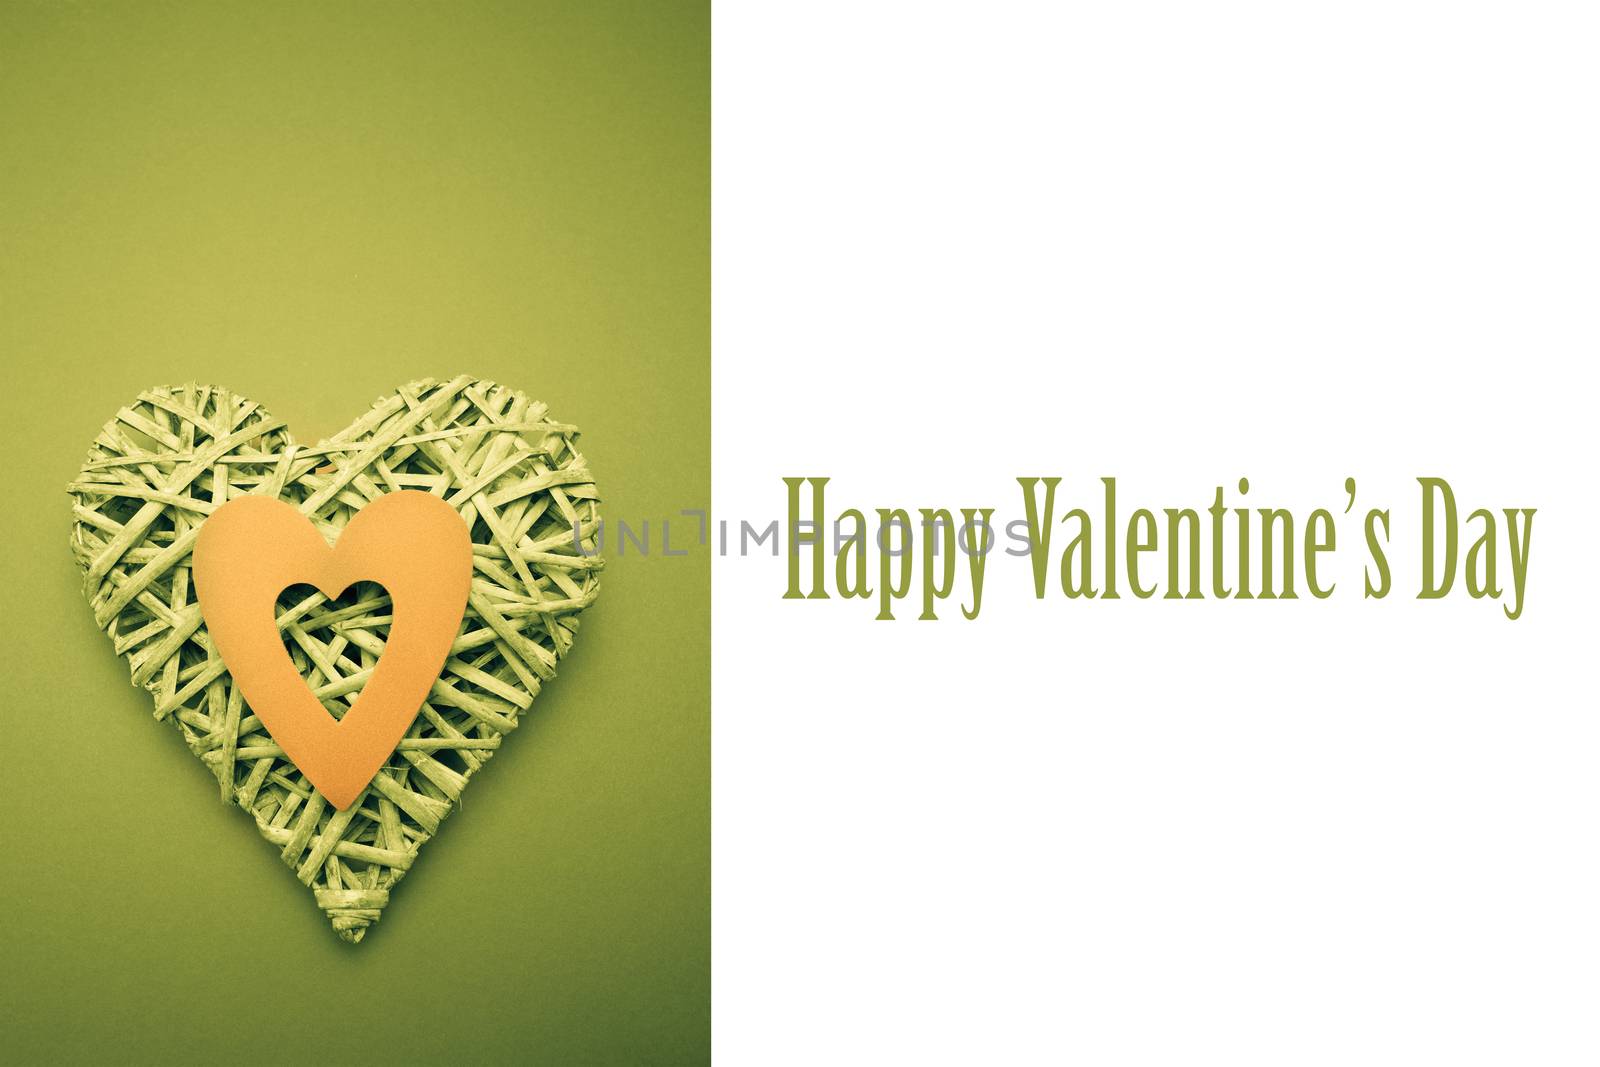 Wicker heart ornament with green paper cut out against cute valentines message